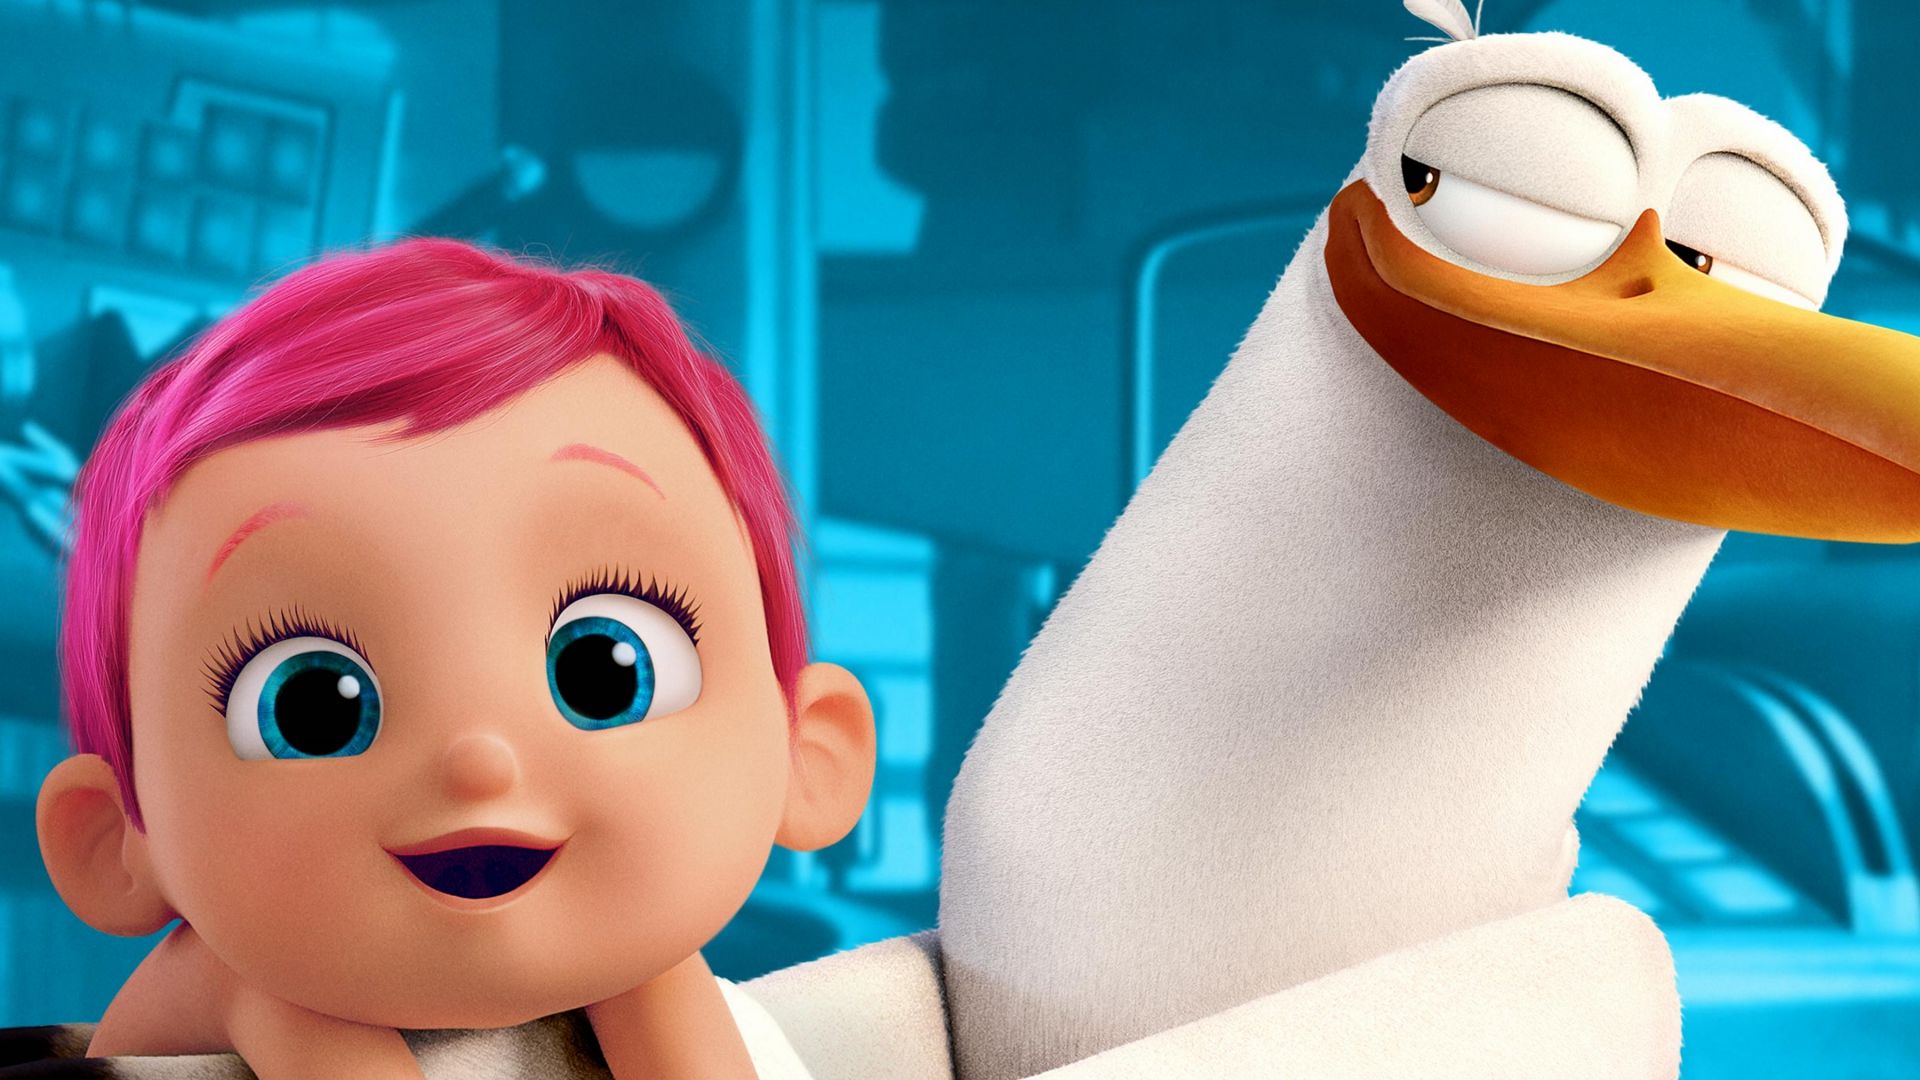 Storks, baby, best animation movies of 2016 (horizontal)